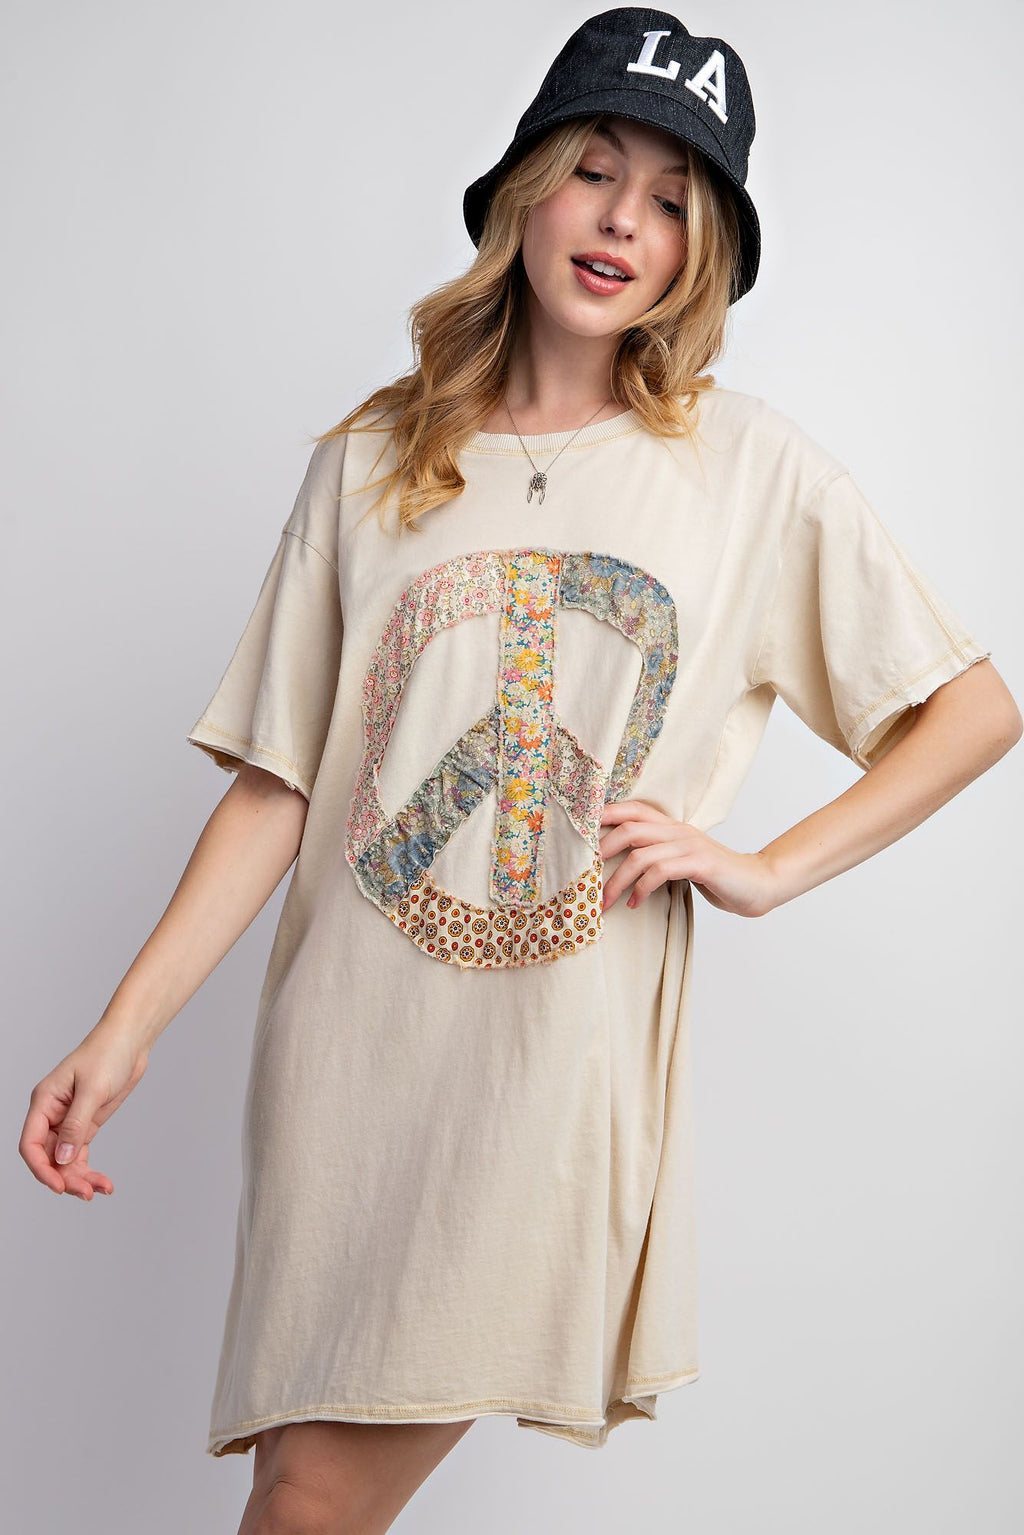 Give Peace A Chance Patchwork Dress